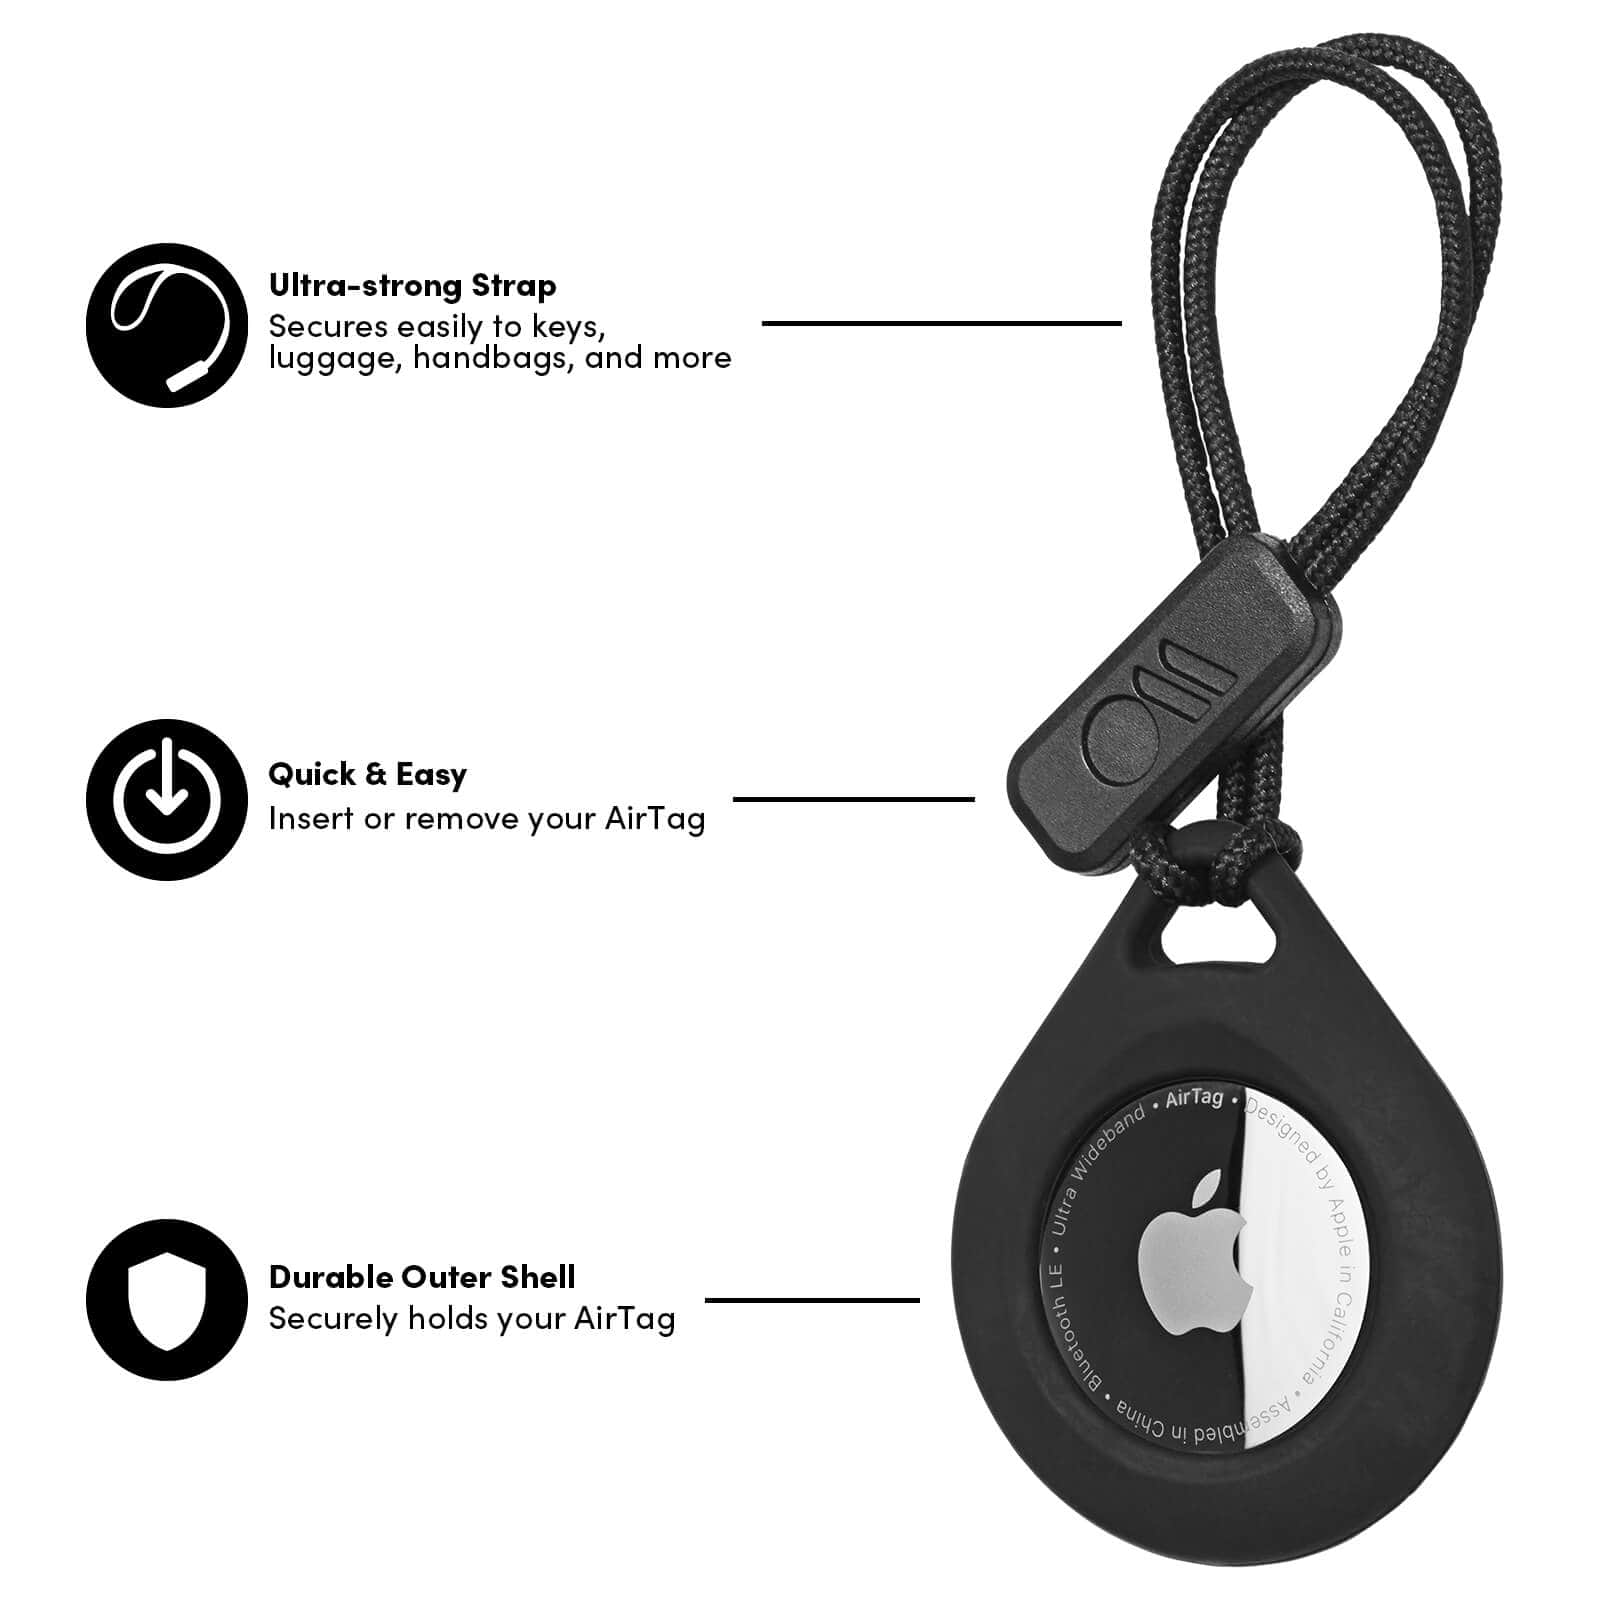 Ultra-strong Strap secures easily to keys, luggage, handbags, and more. Quick and Easy, Insert or remove your AirTag, Durable Outer shell Securely holds your AirTag. color::Black